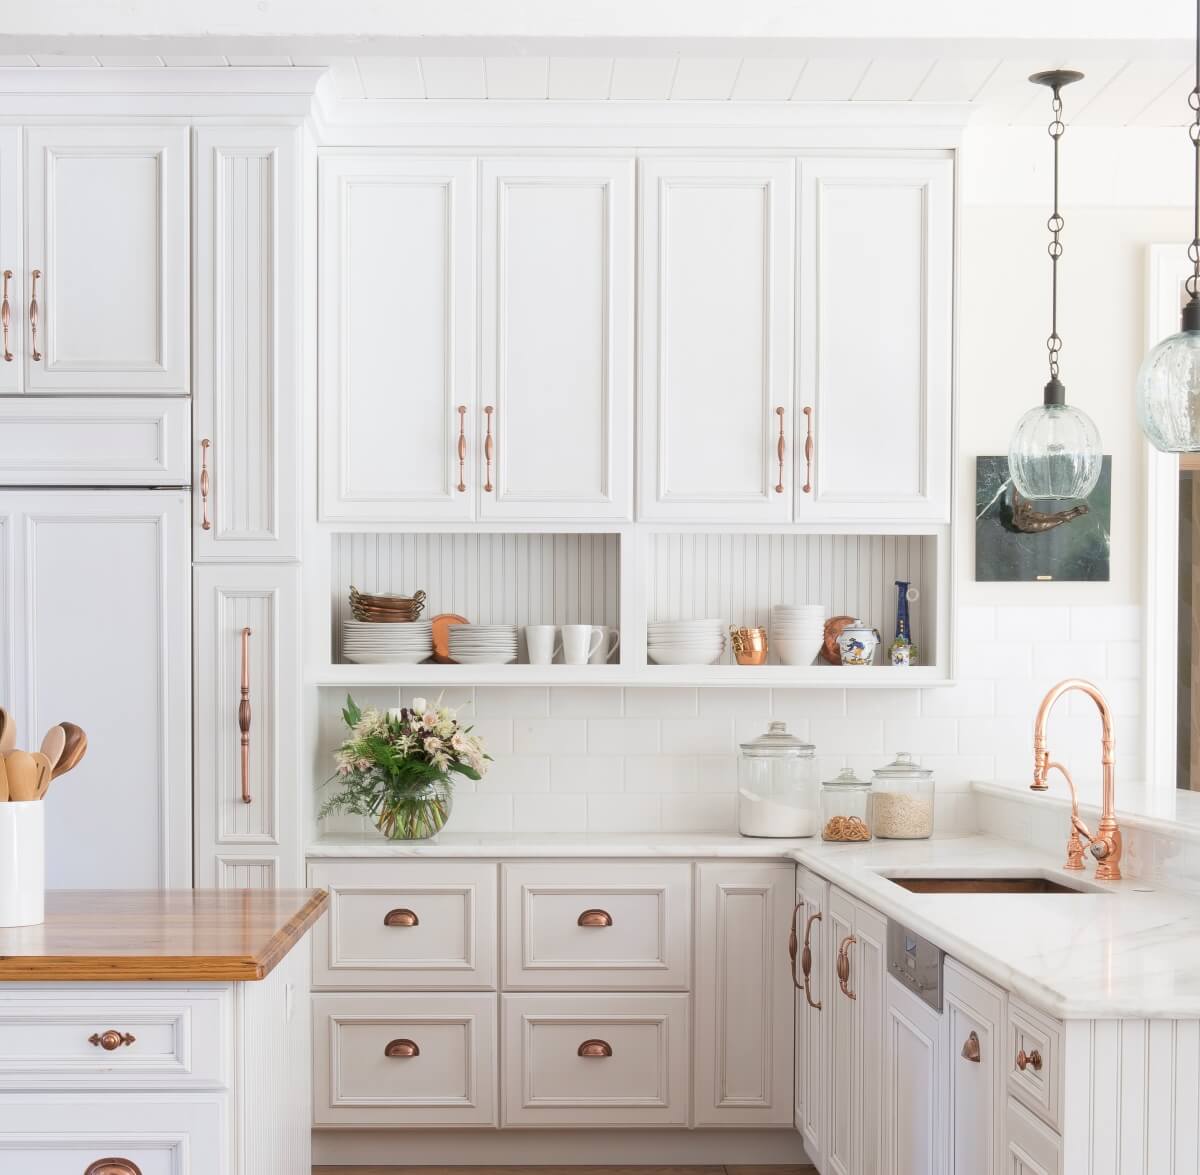 A French Farmhouse style kitchen remodel with bright white painted cabinets and copper hardware. A Dura Supreme kitchen featuring Wall Cabinets with Open Display Below.